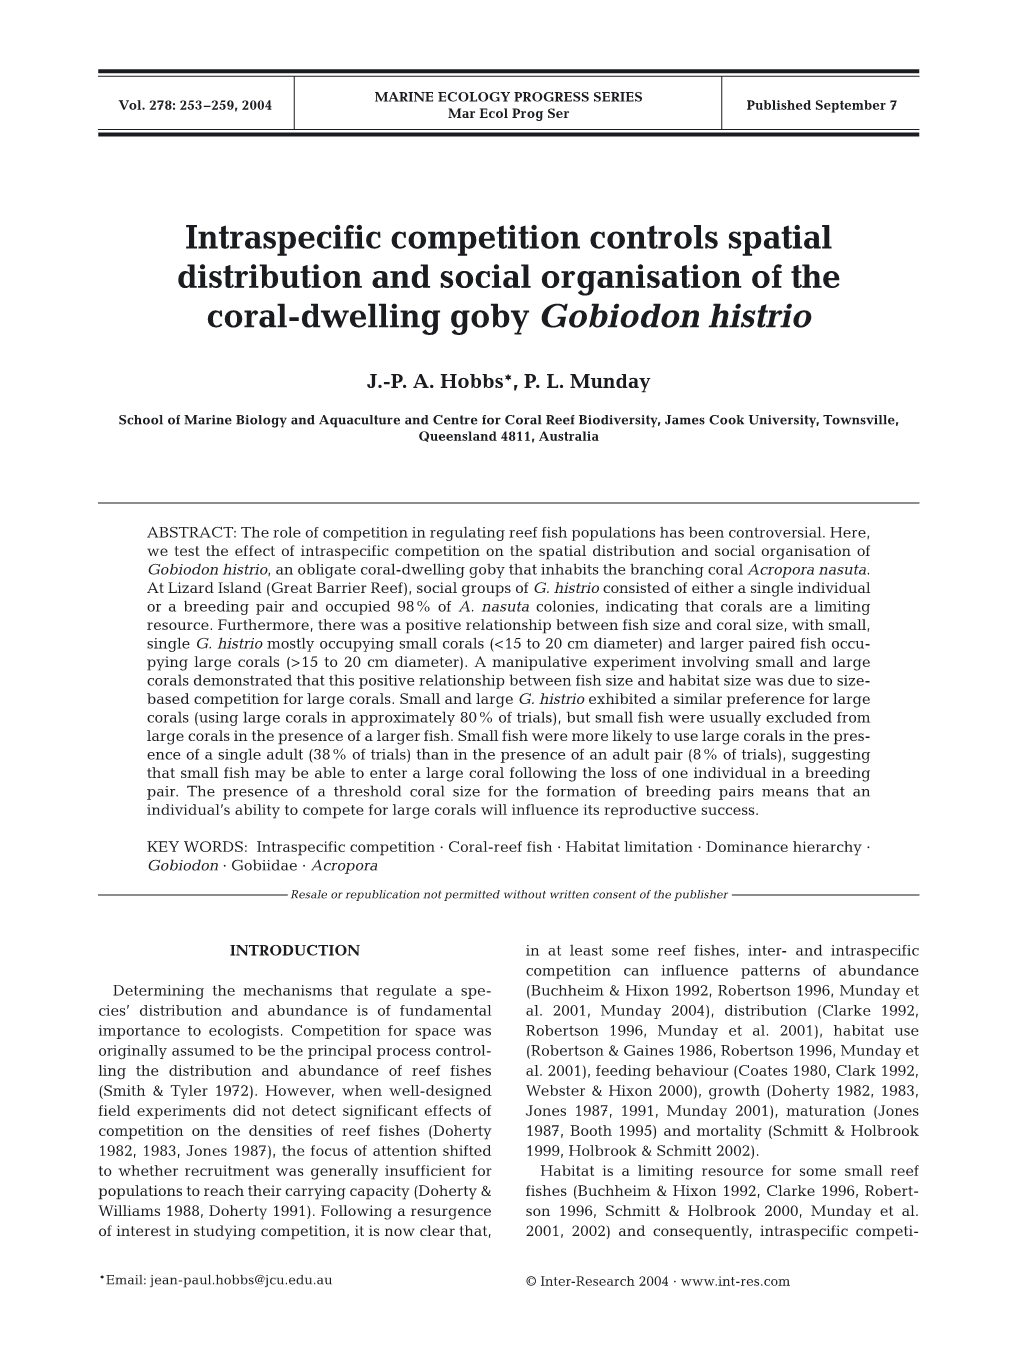 Intraspecific Competition Controls Spatial Distribution and Social Organisation of the Coral-Dwelling Goby Gobiodon Histrio